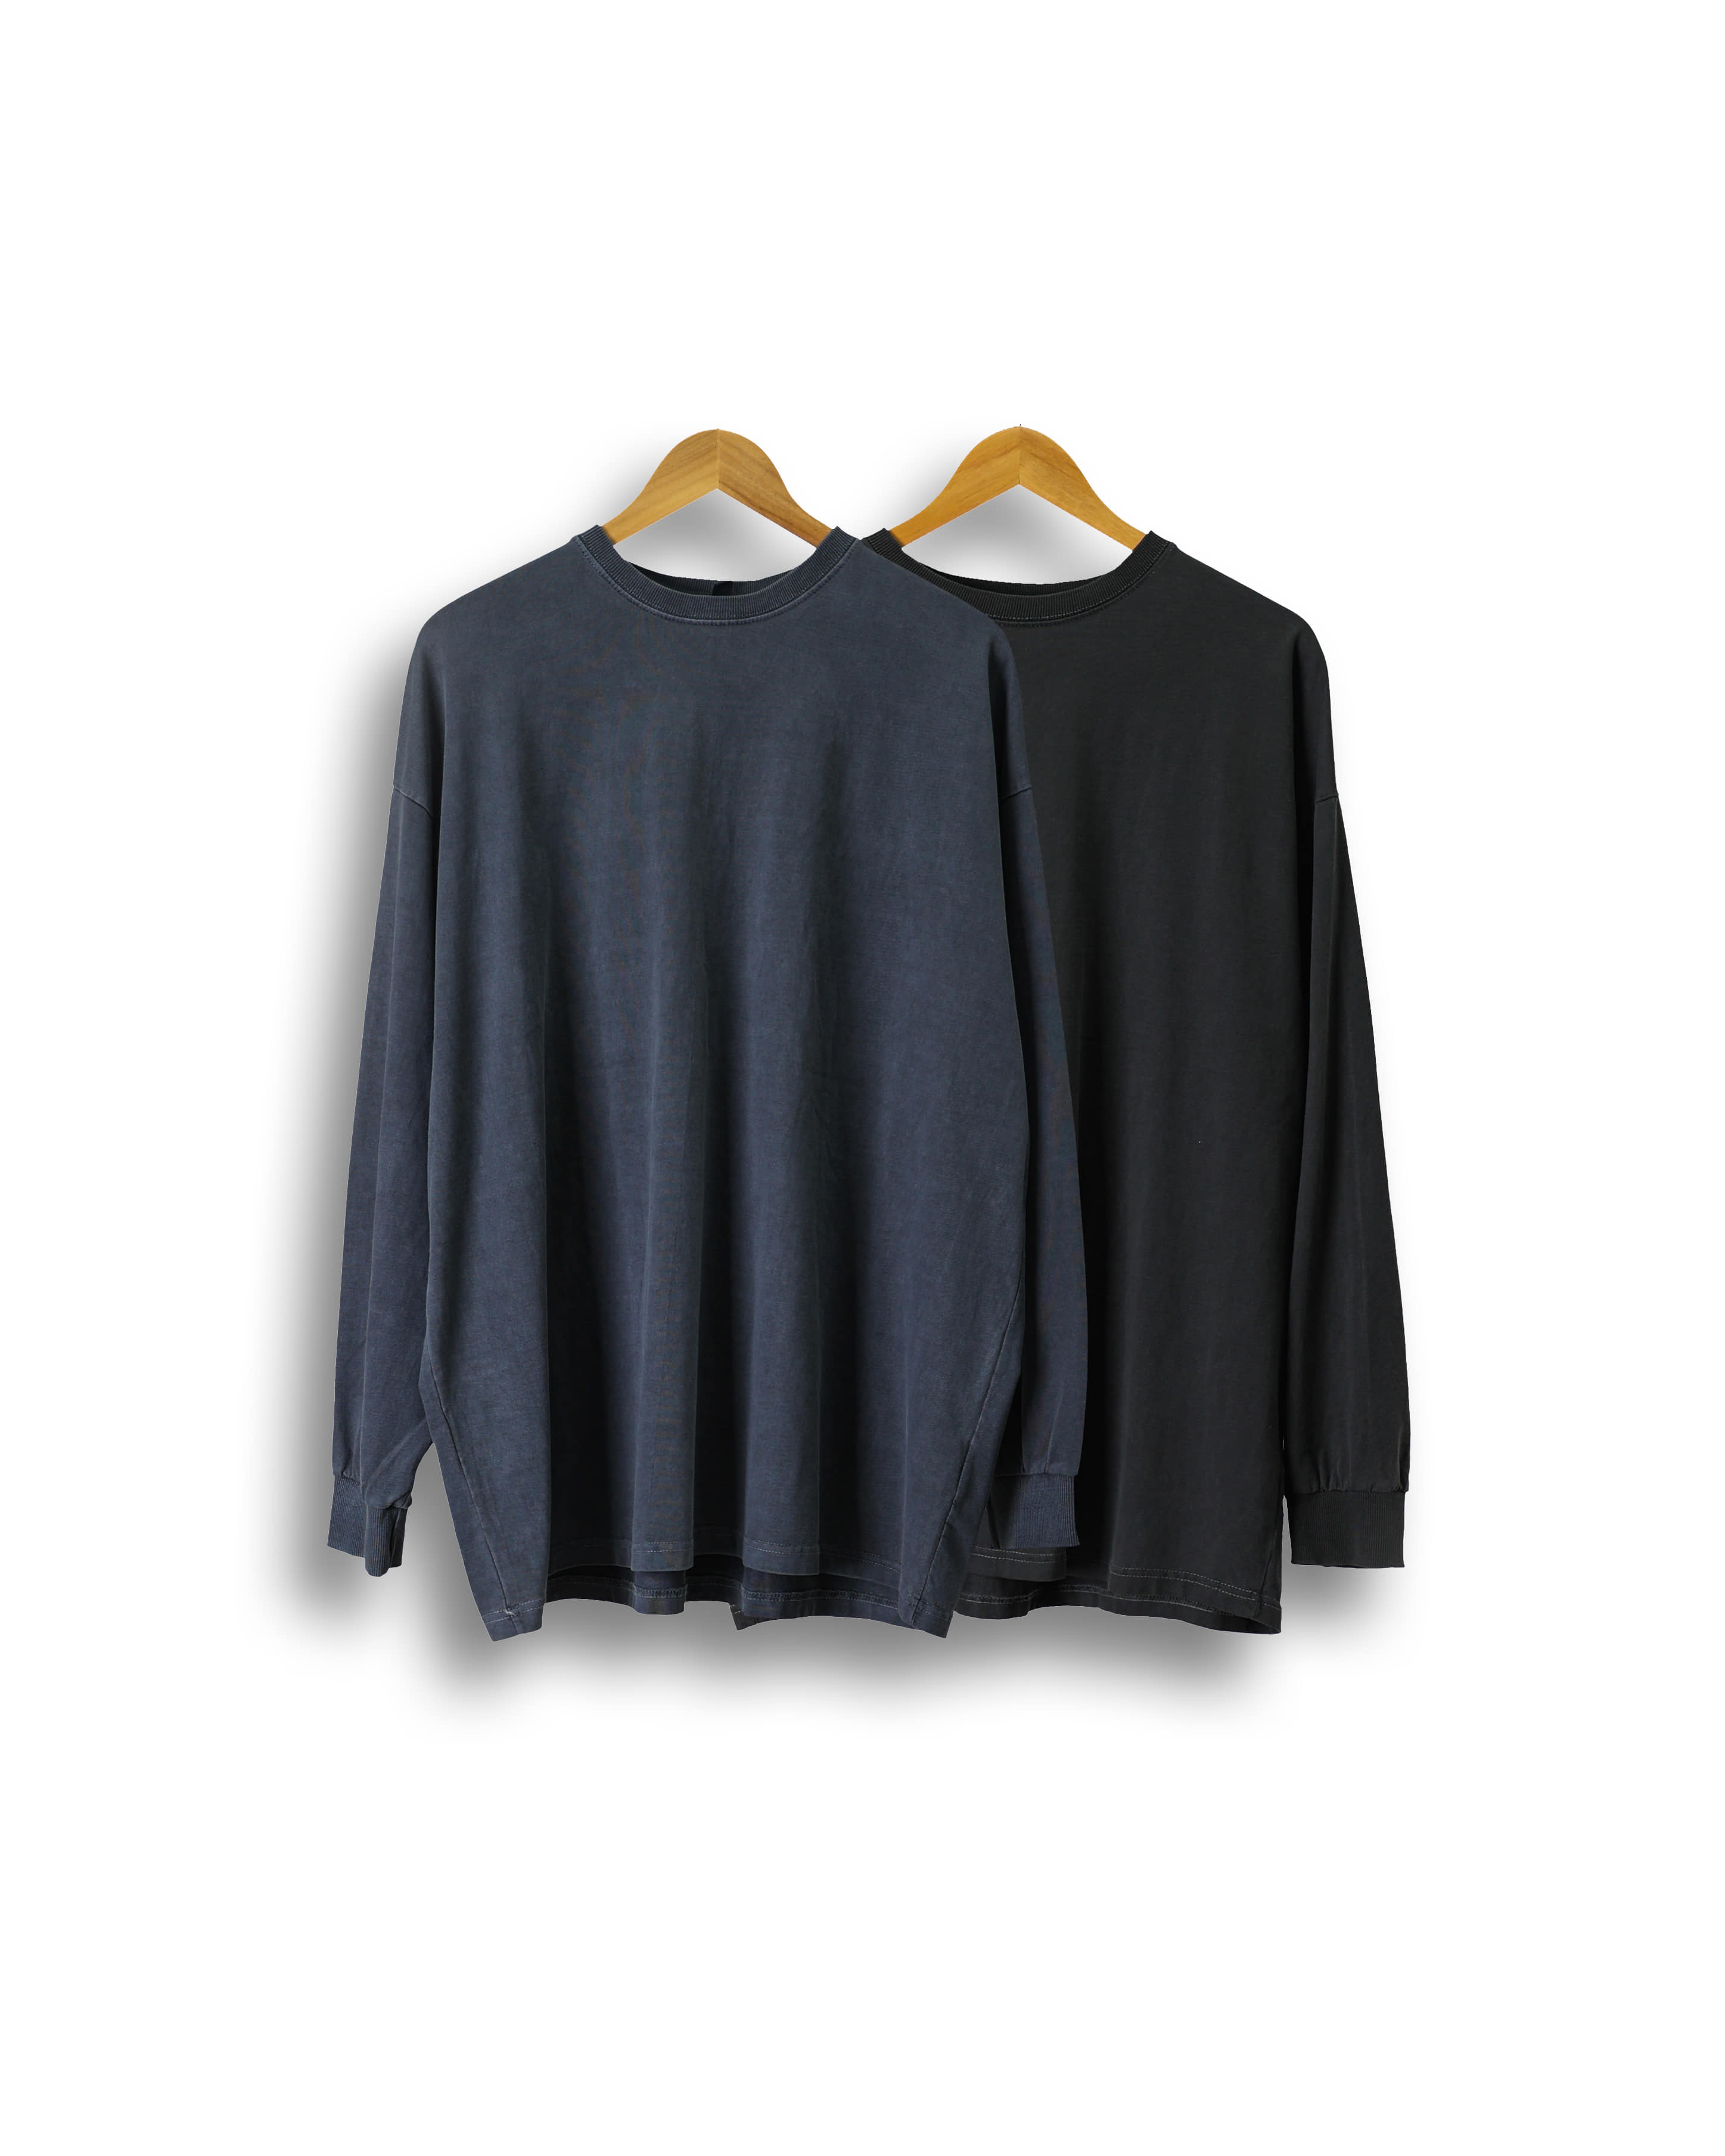 ACO Pigment Lip Line Long Sleeves (Charcoal/Navy)